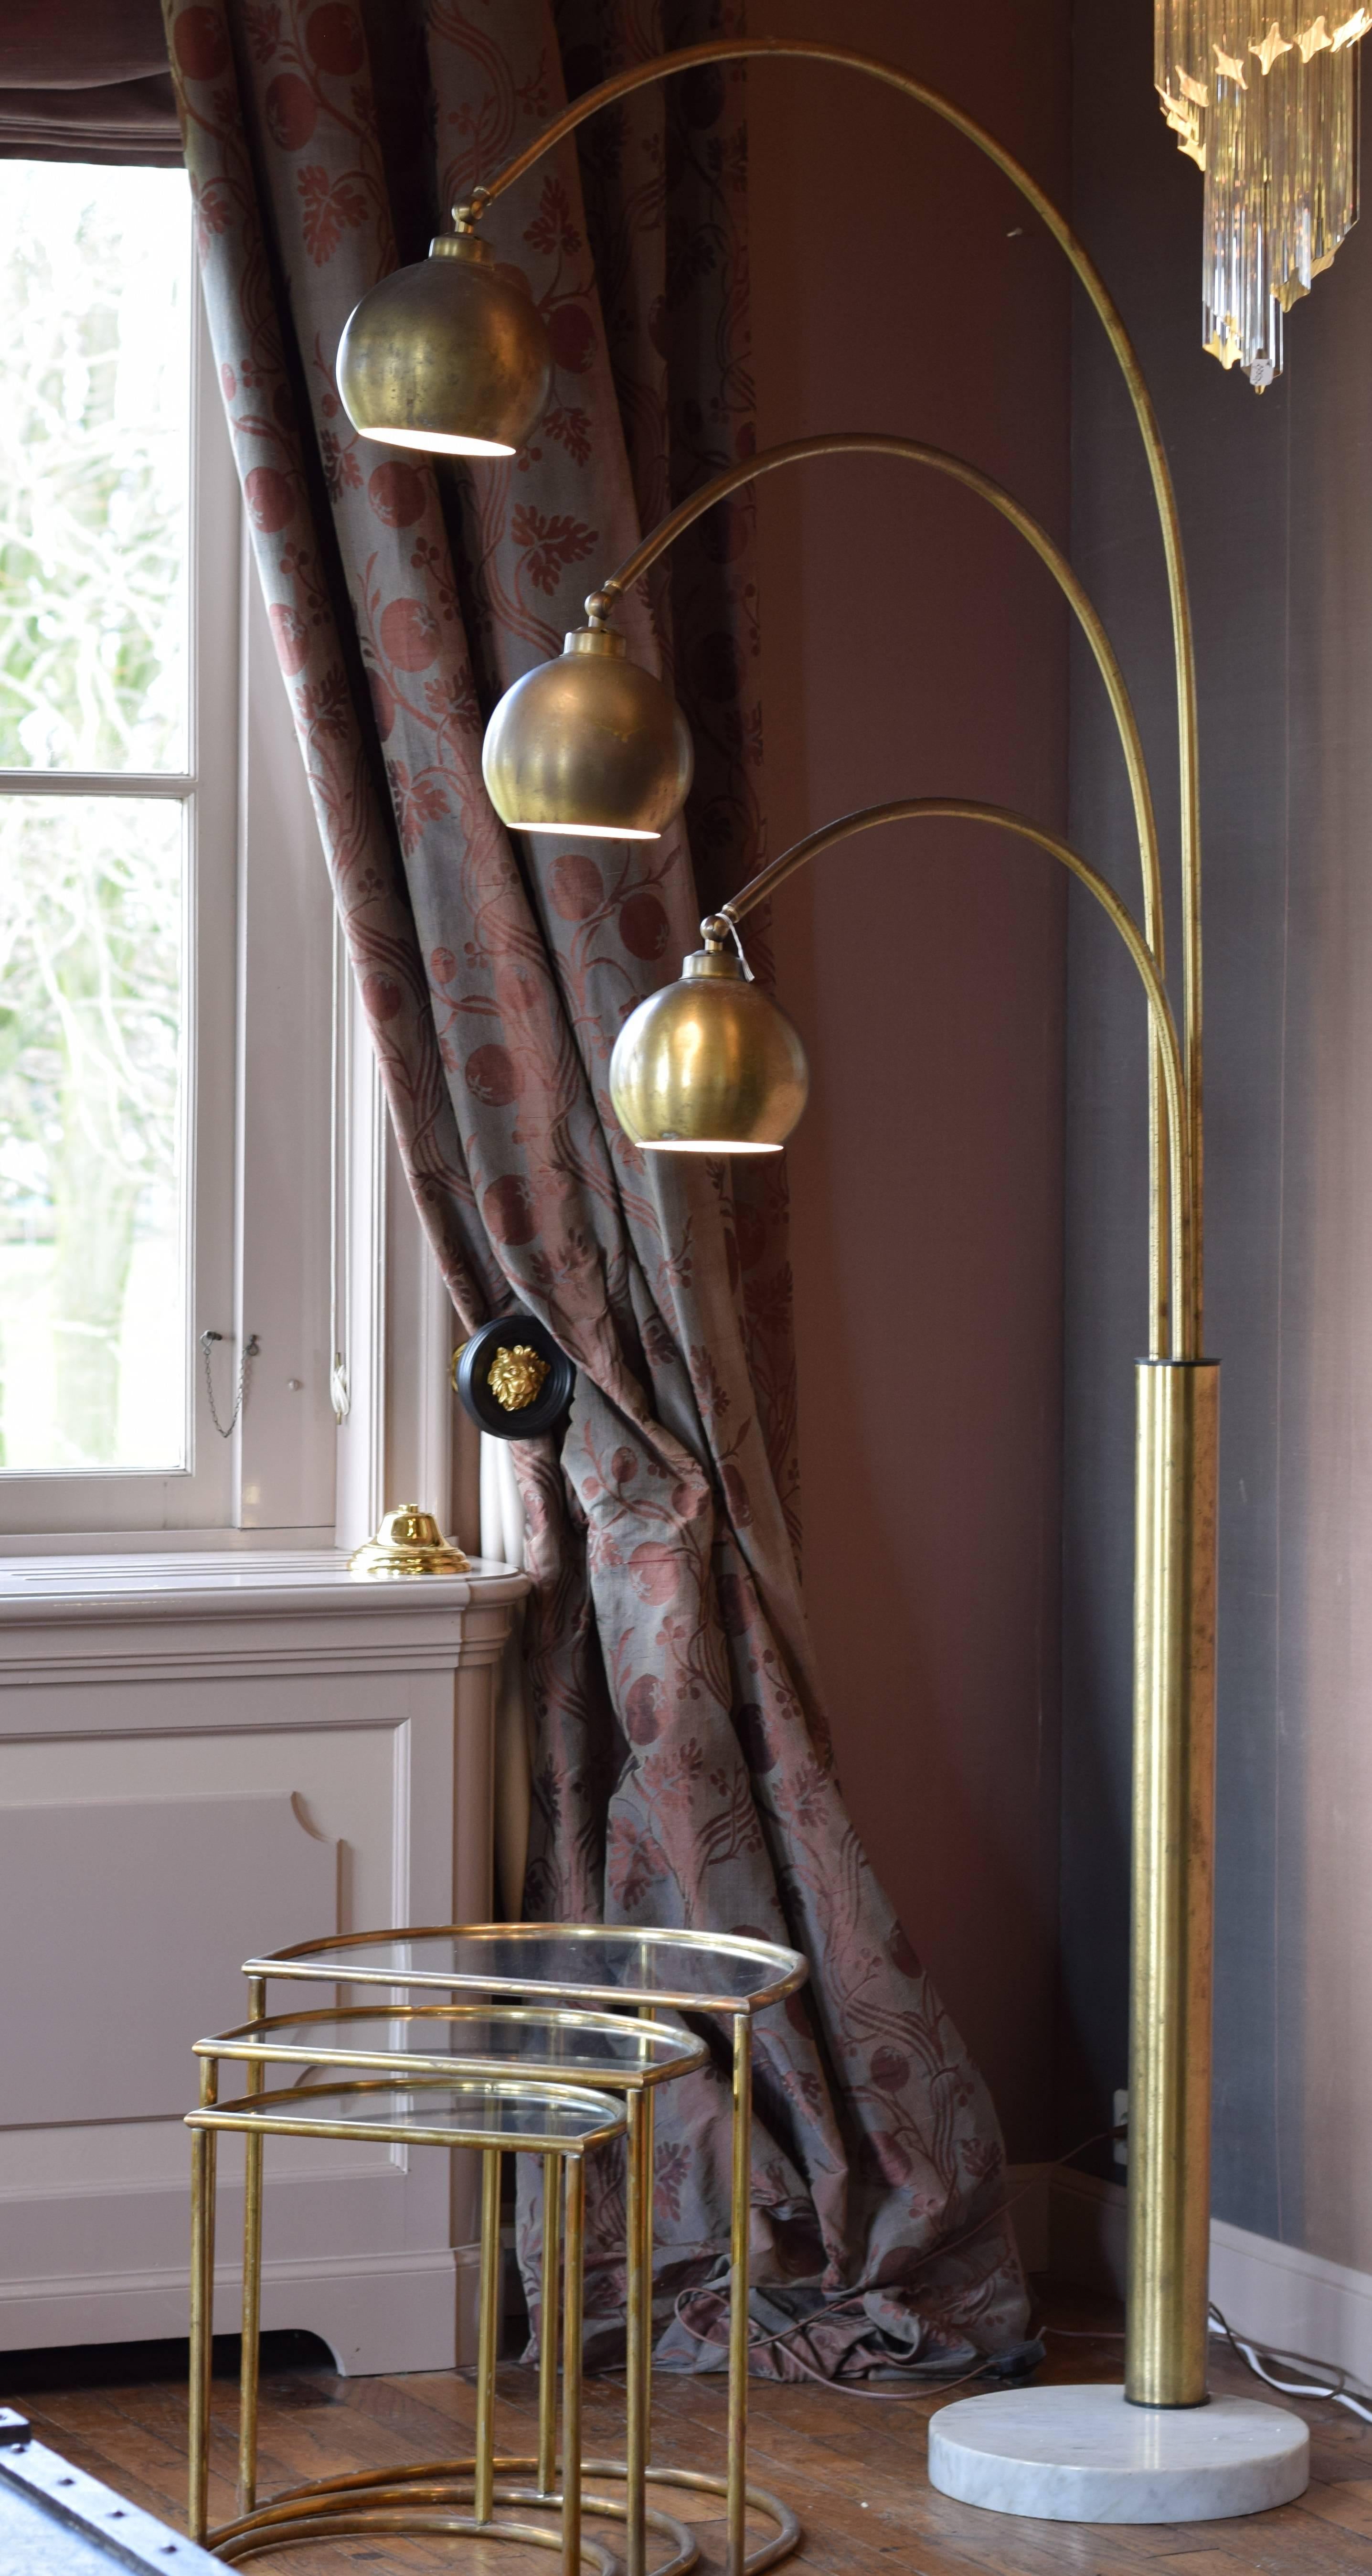 Beautiful three-light floor lamp designed in the 1970s by the Italian designer Angelo Lelli.
The lamp is made from brushed brass on a marble foot. The brass is in a beautiful condition, however there are some signs of aging like small oxidation